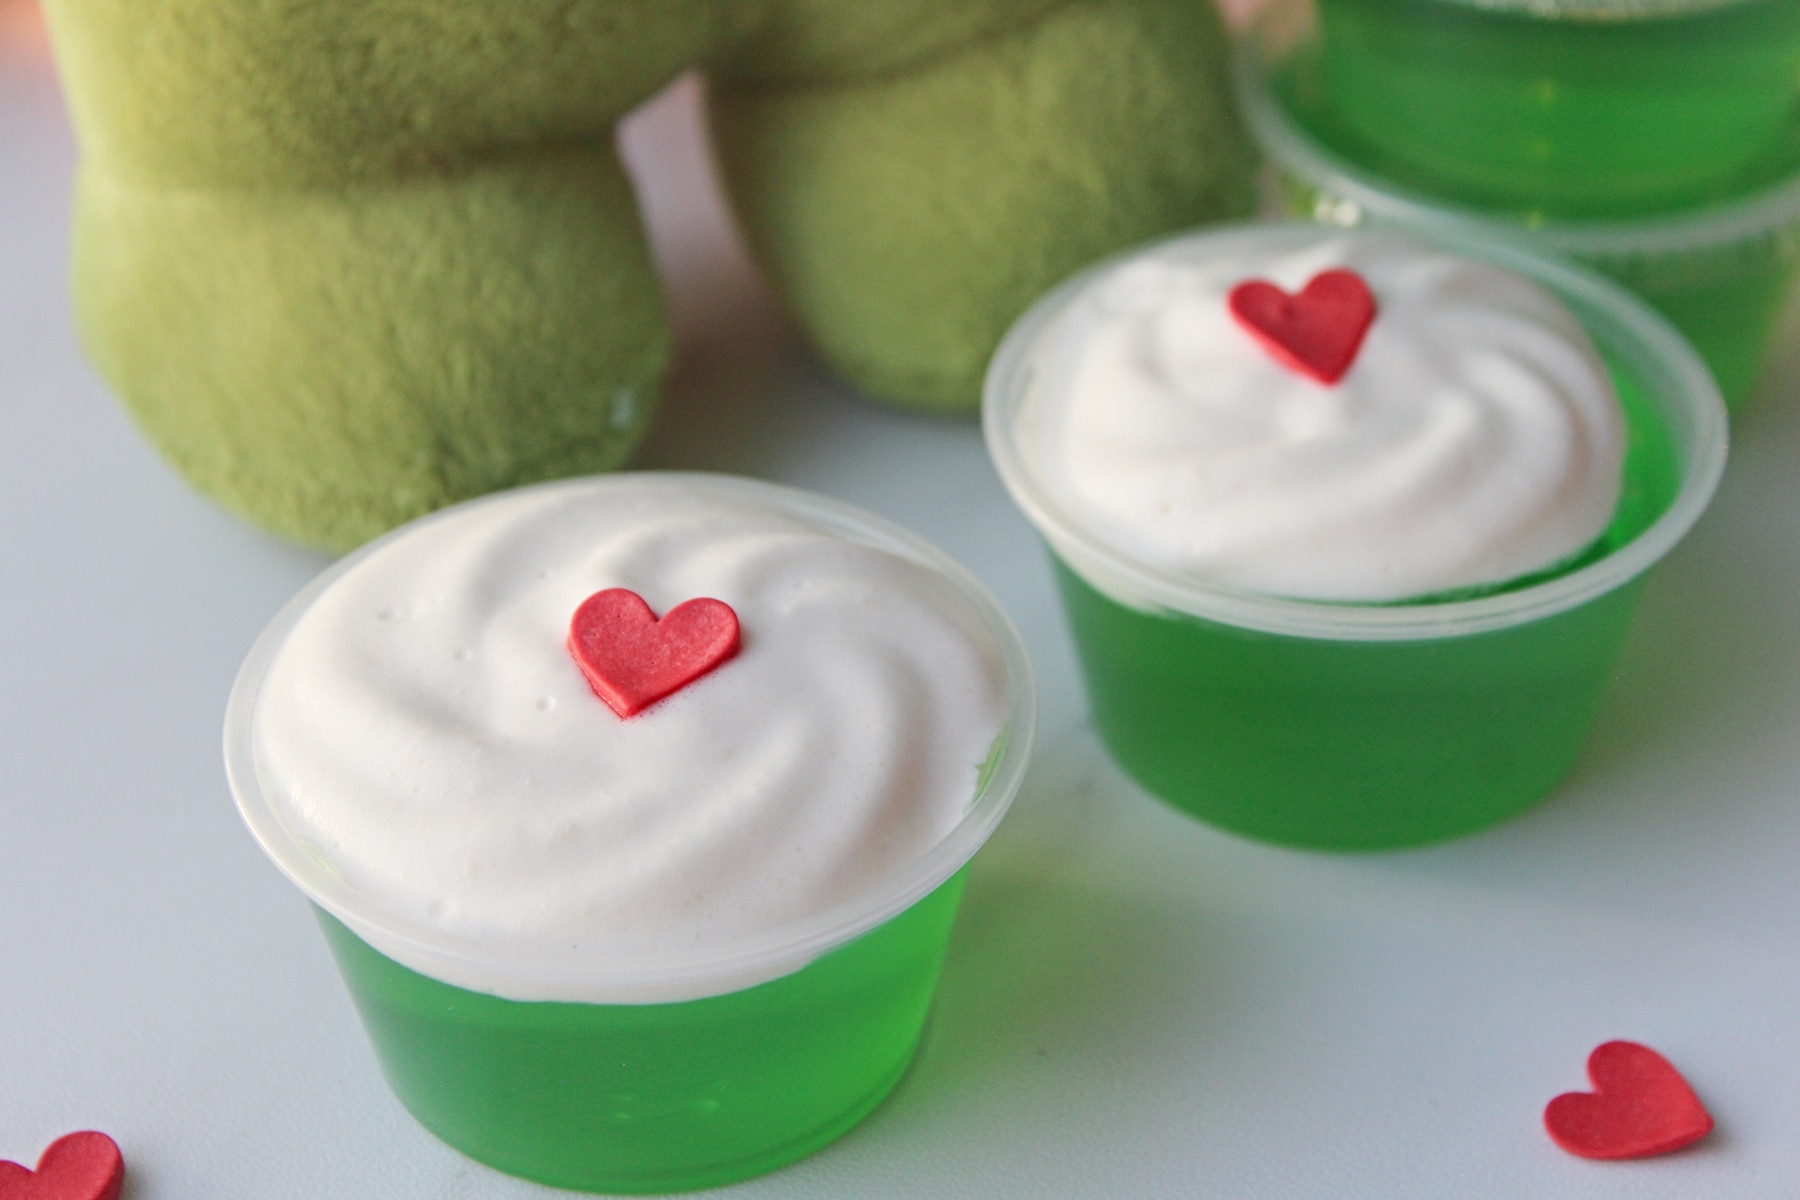 Grinch Jello Shots with heart sprinkles and Grinch character at the back.